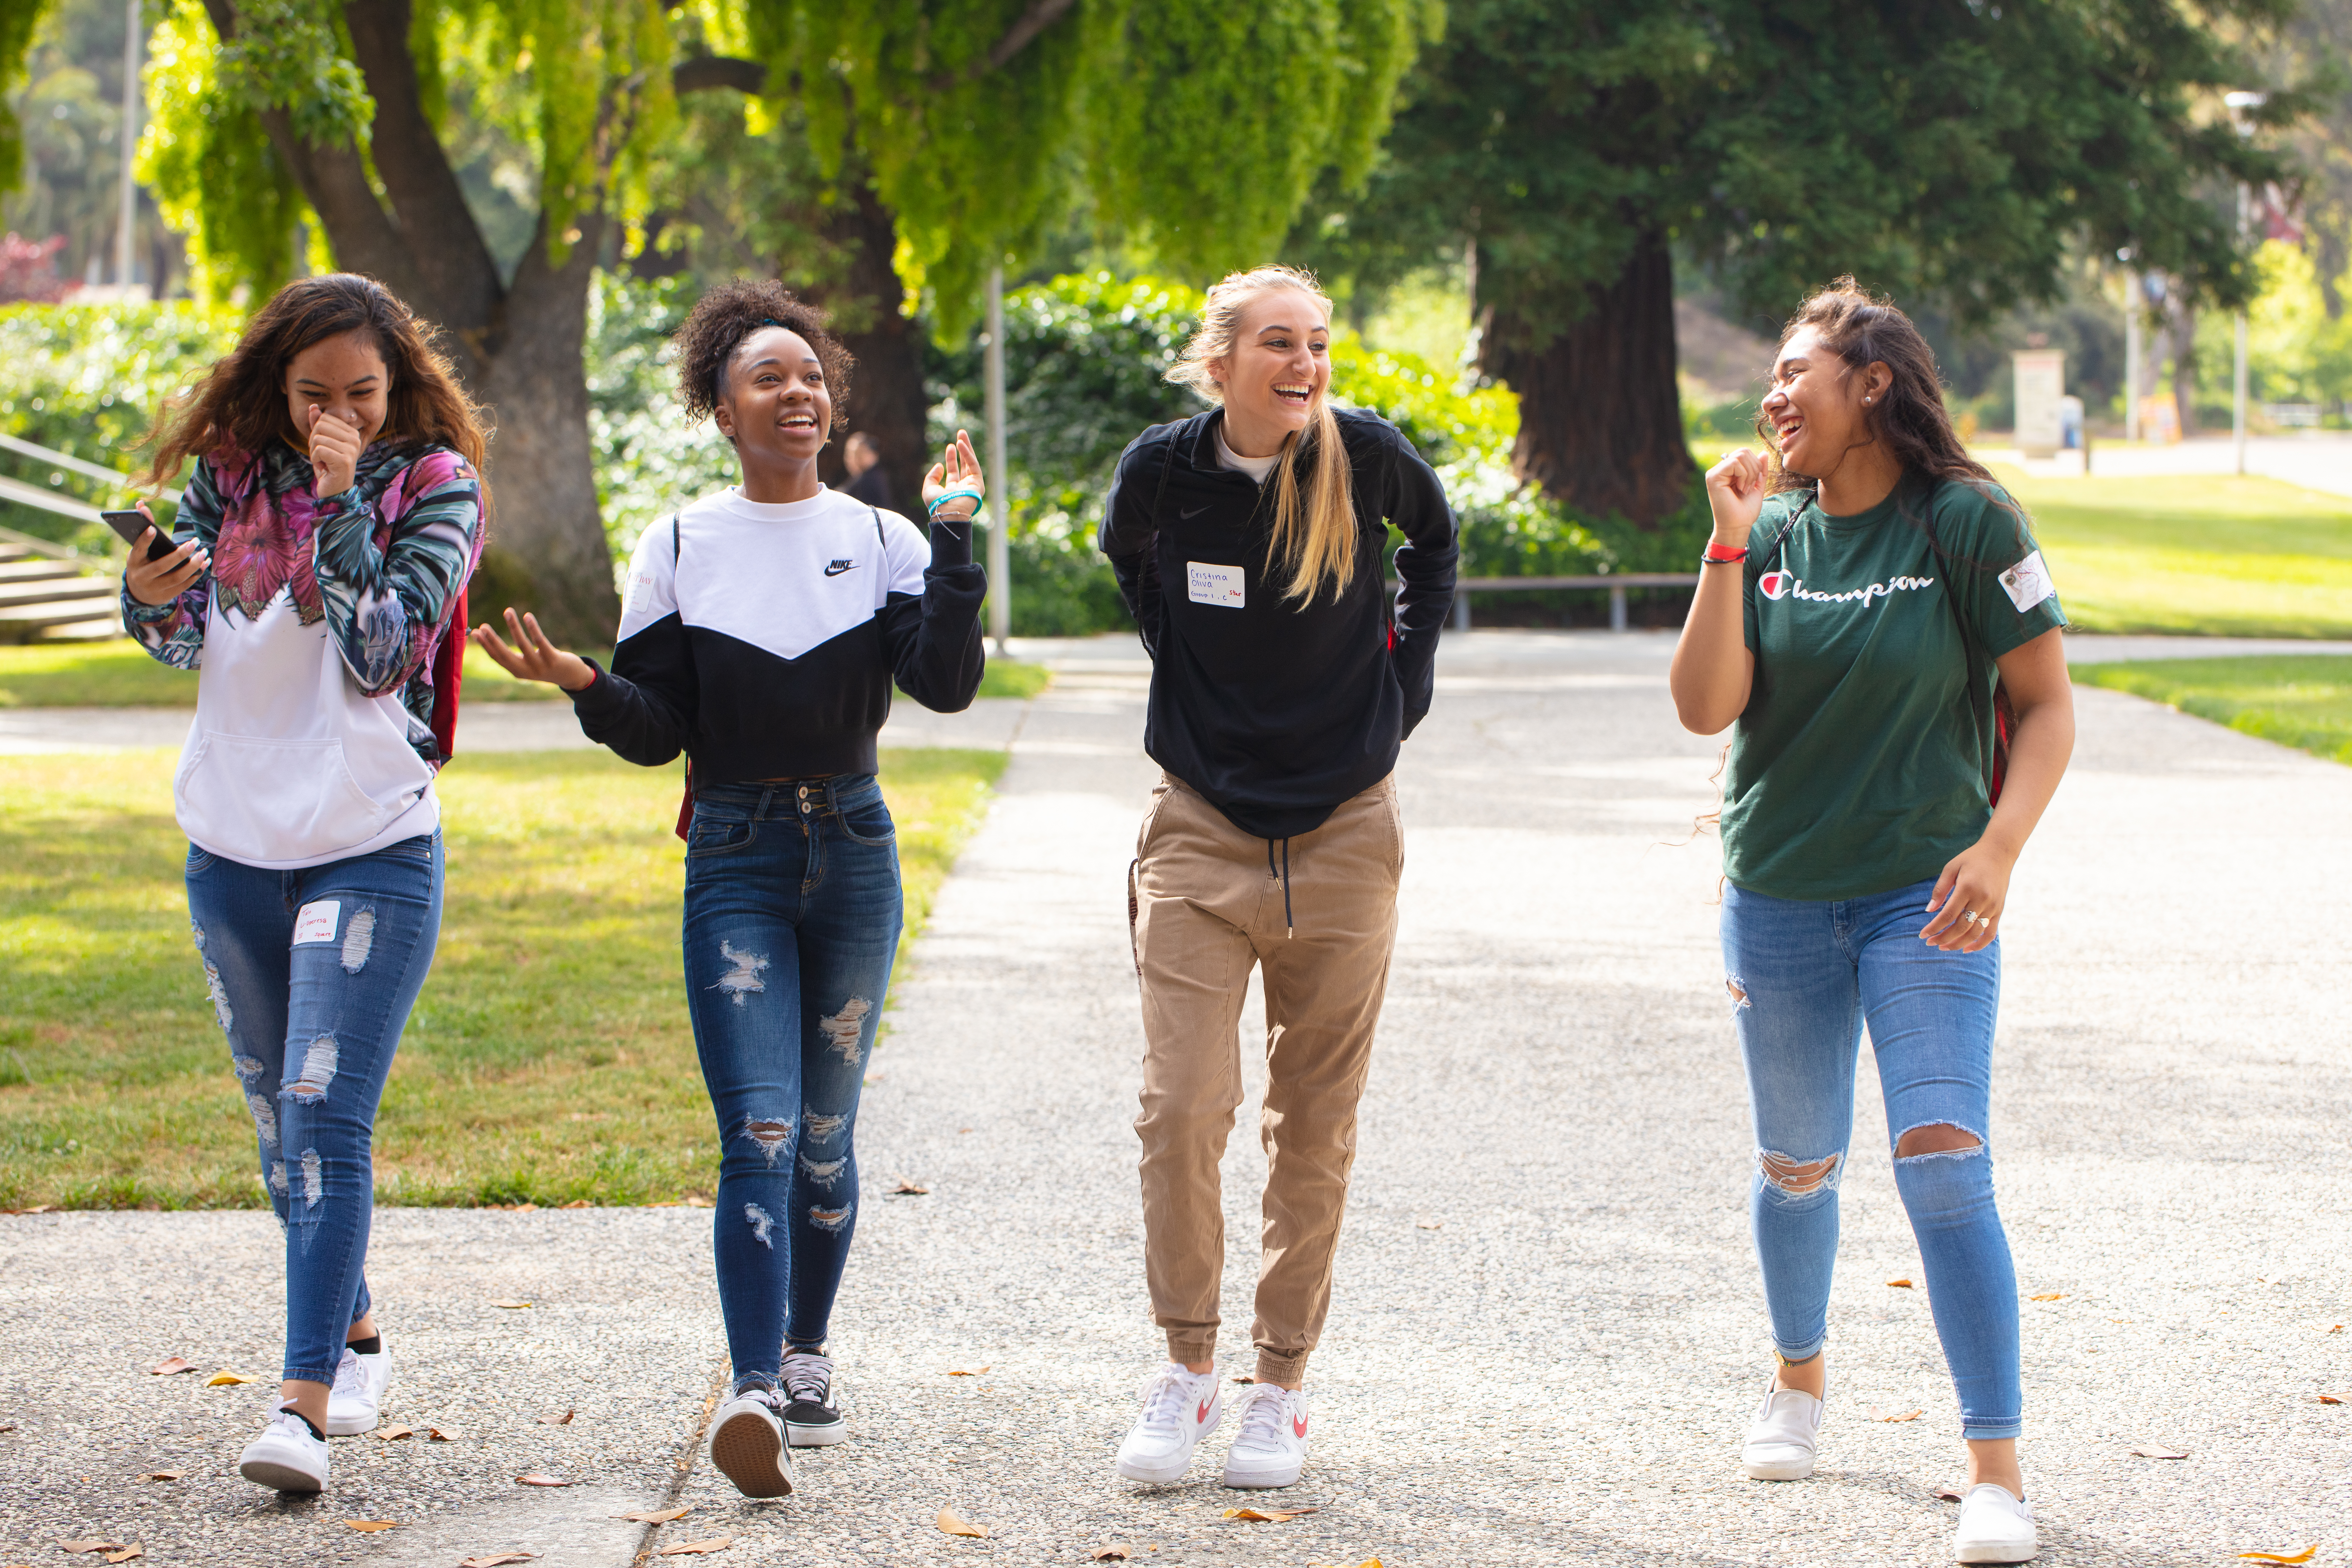  Four Female Students On Campus